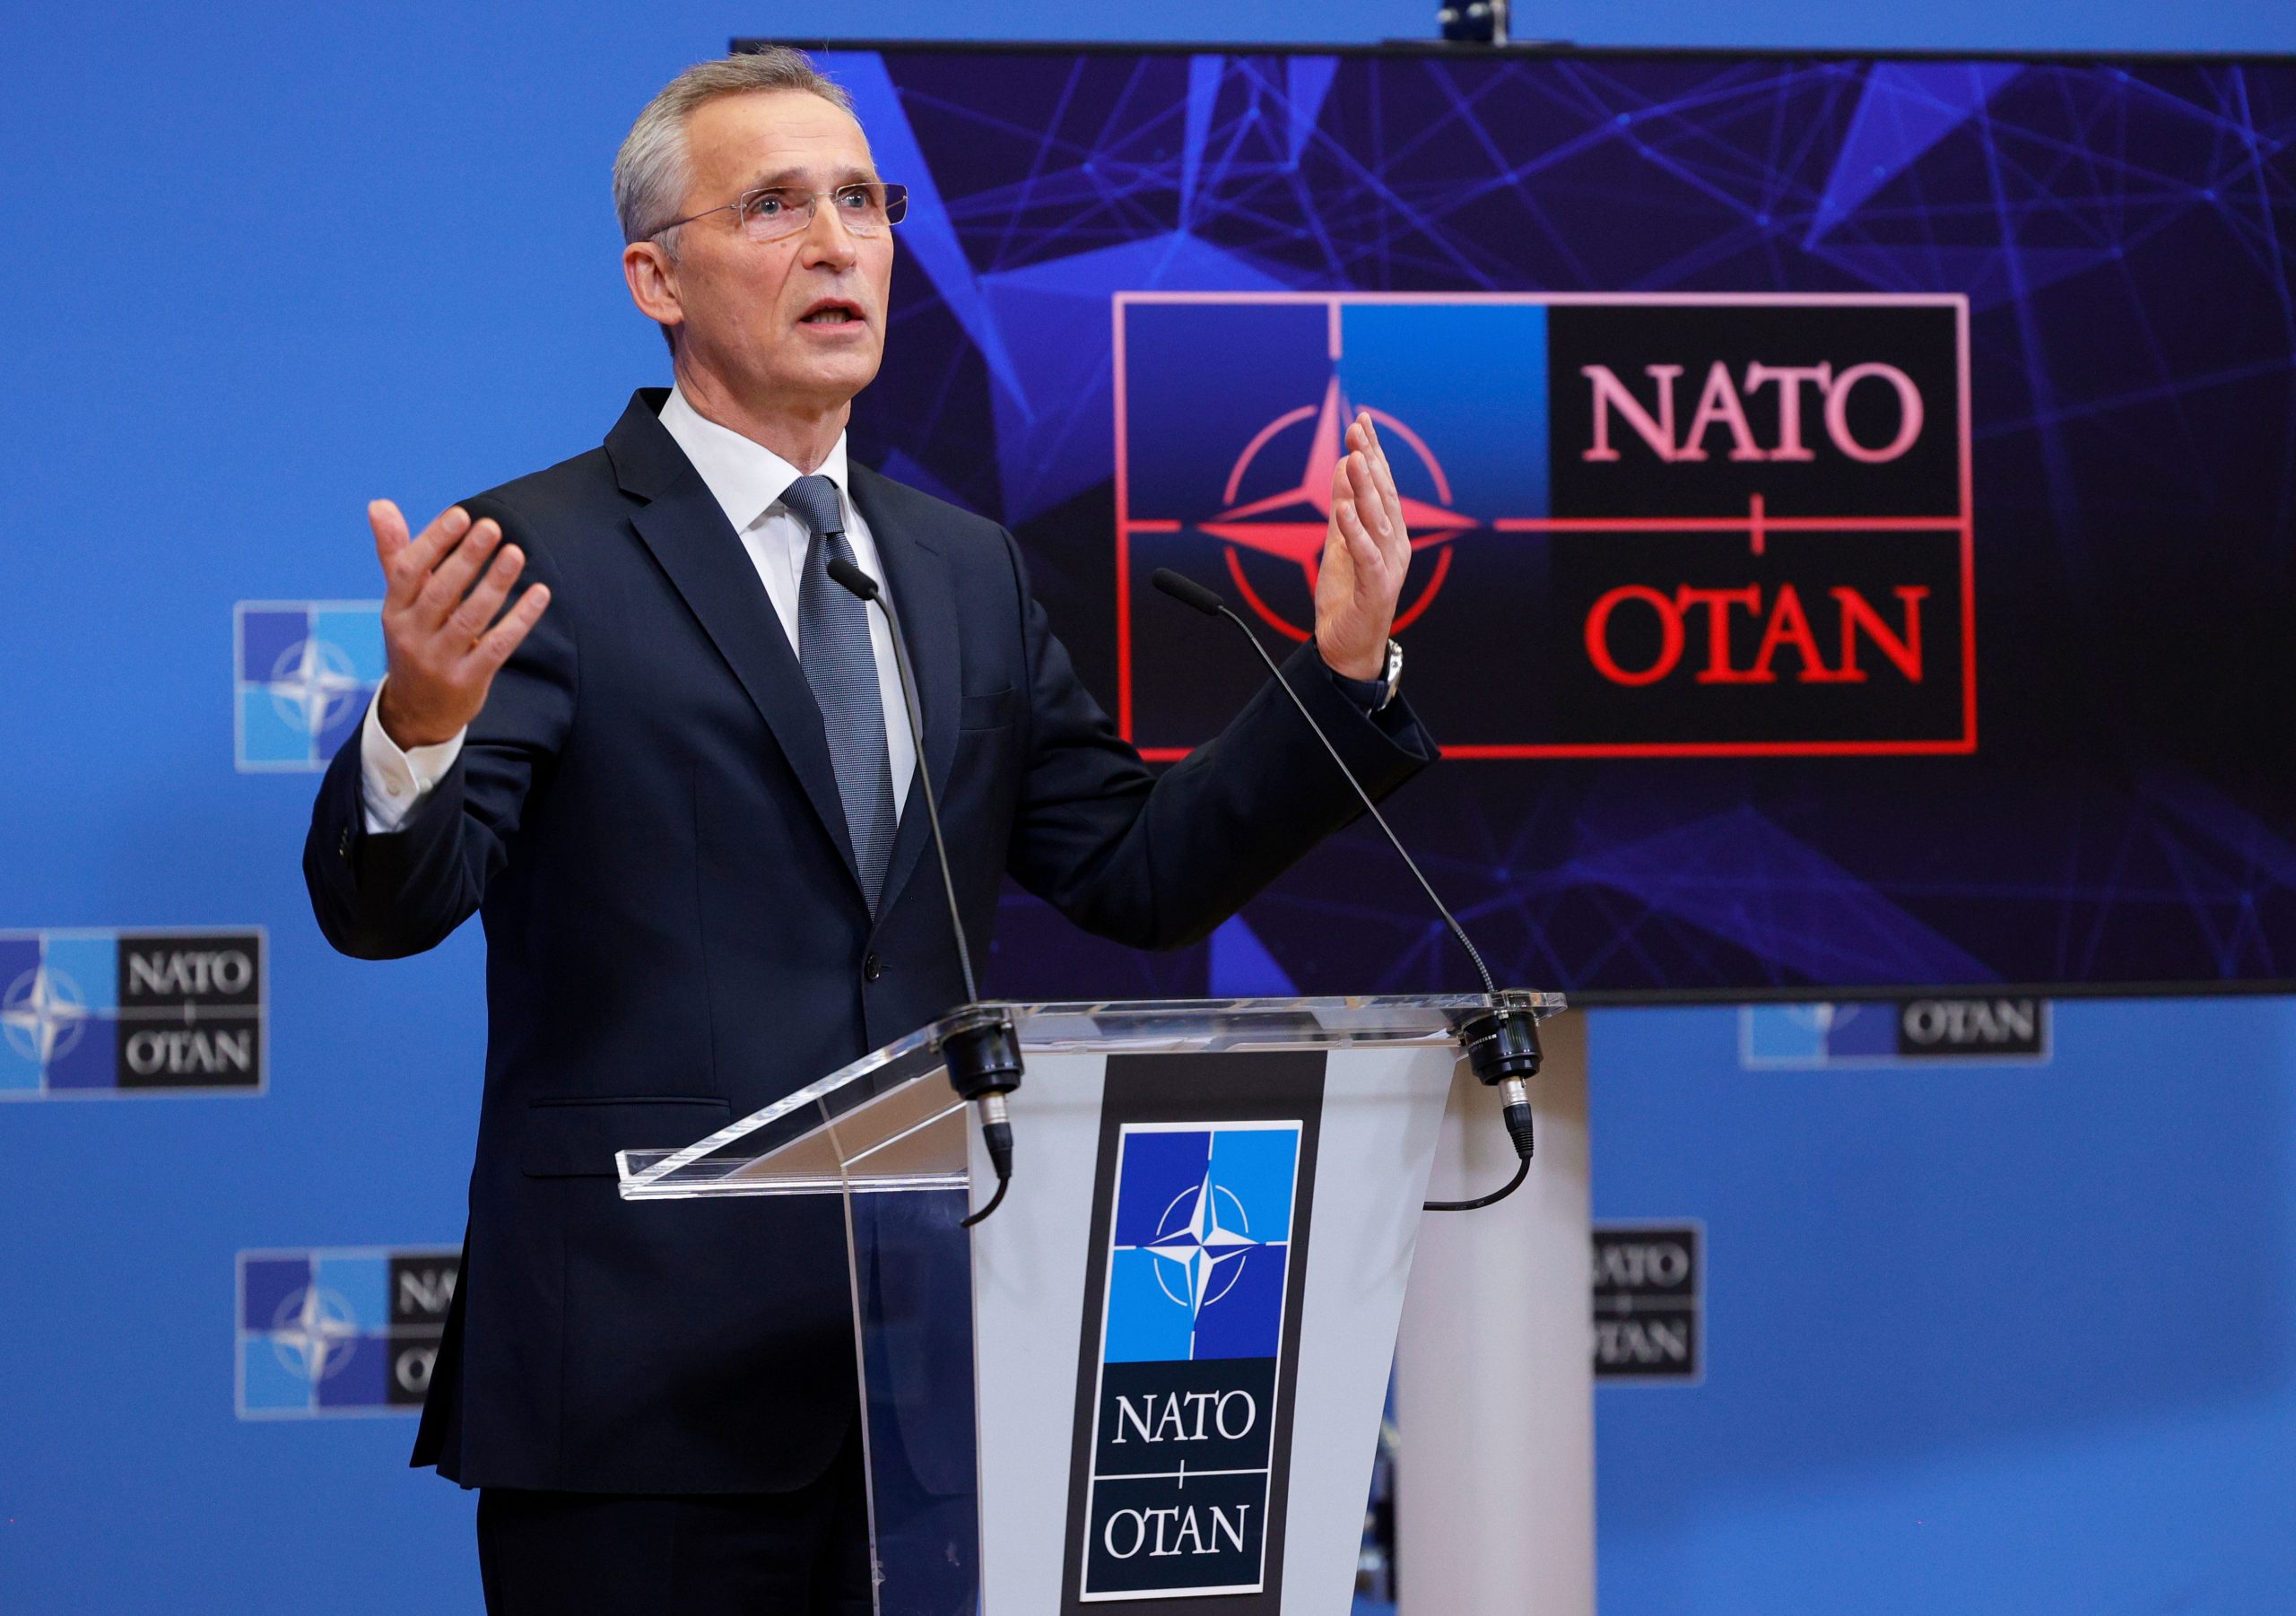 Russia may use chemical weapons following Ukraine invasion: NATO chief